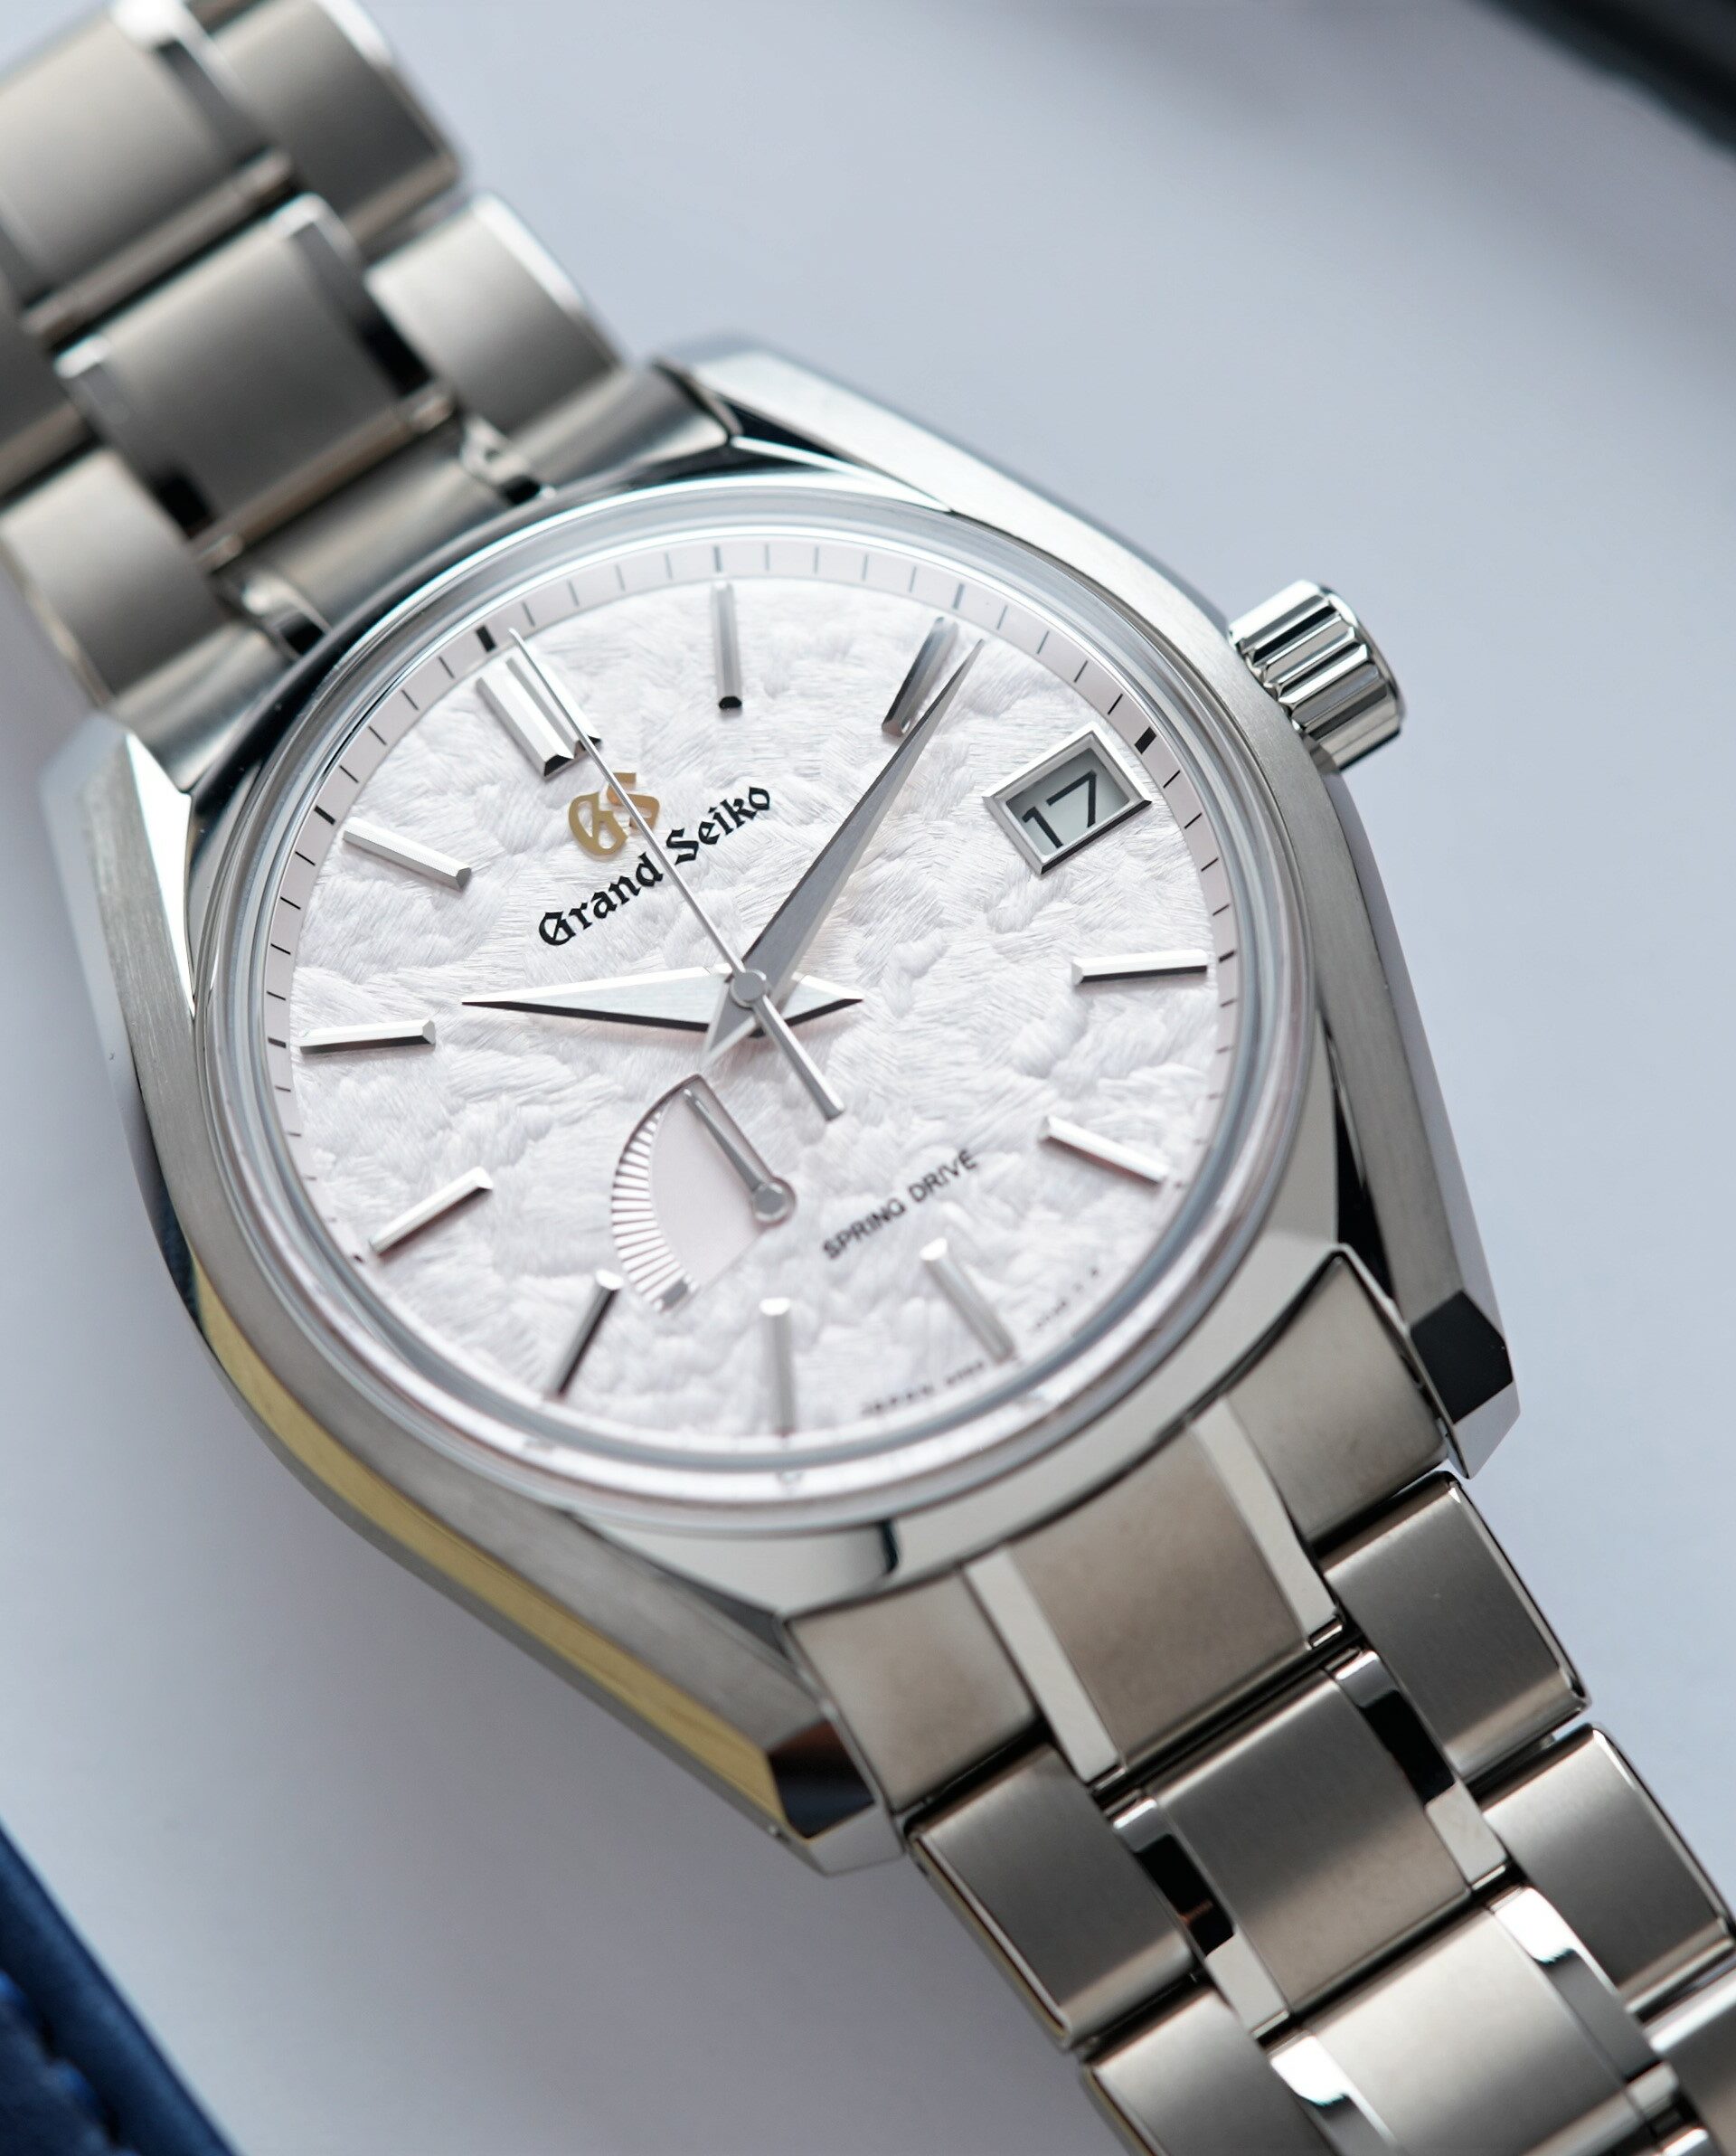 Grand Seiko Heritage Collection Seasons 'Spring' SBGA413 watch featured under white light on an angle.